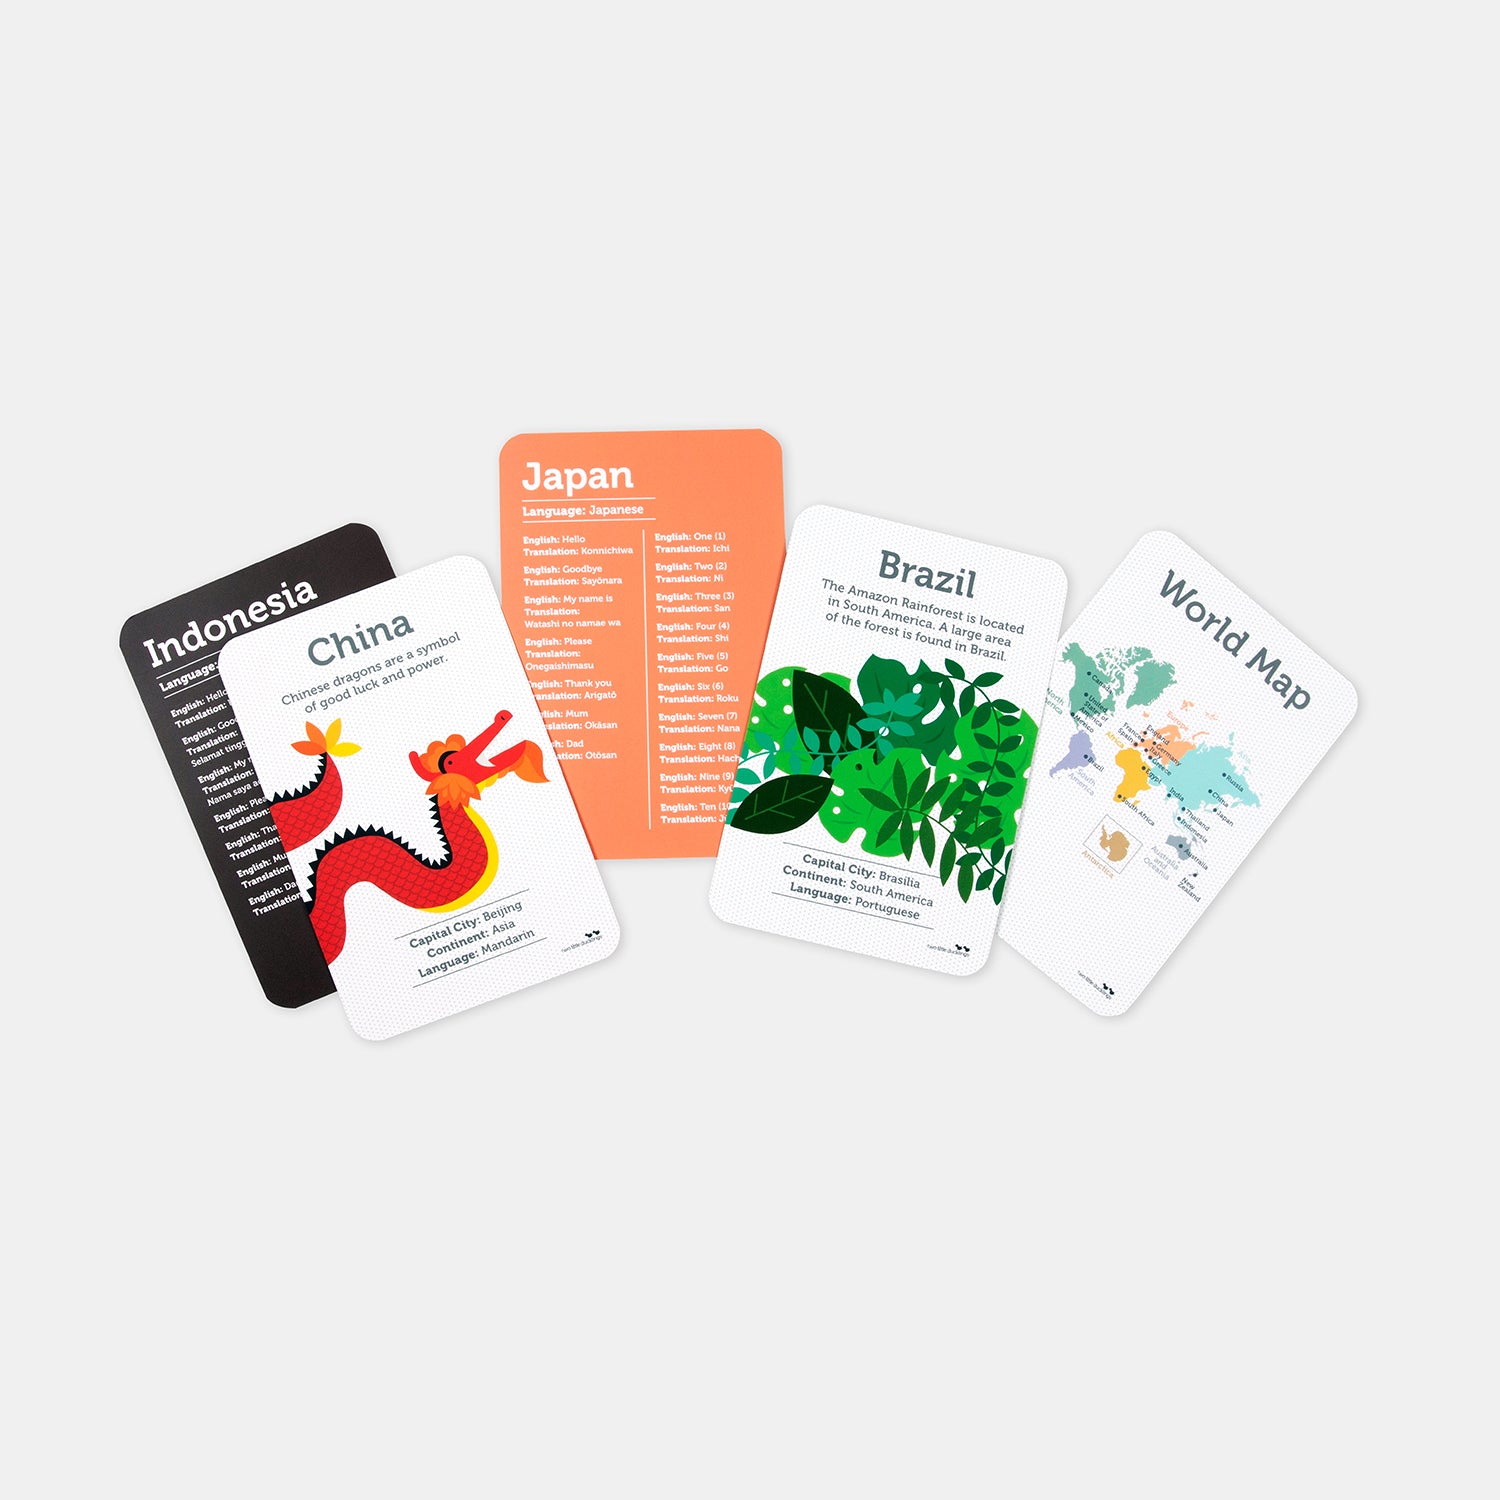 Country and Language Flash Cards